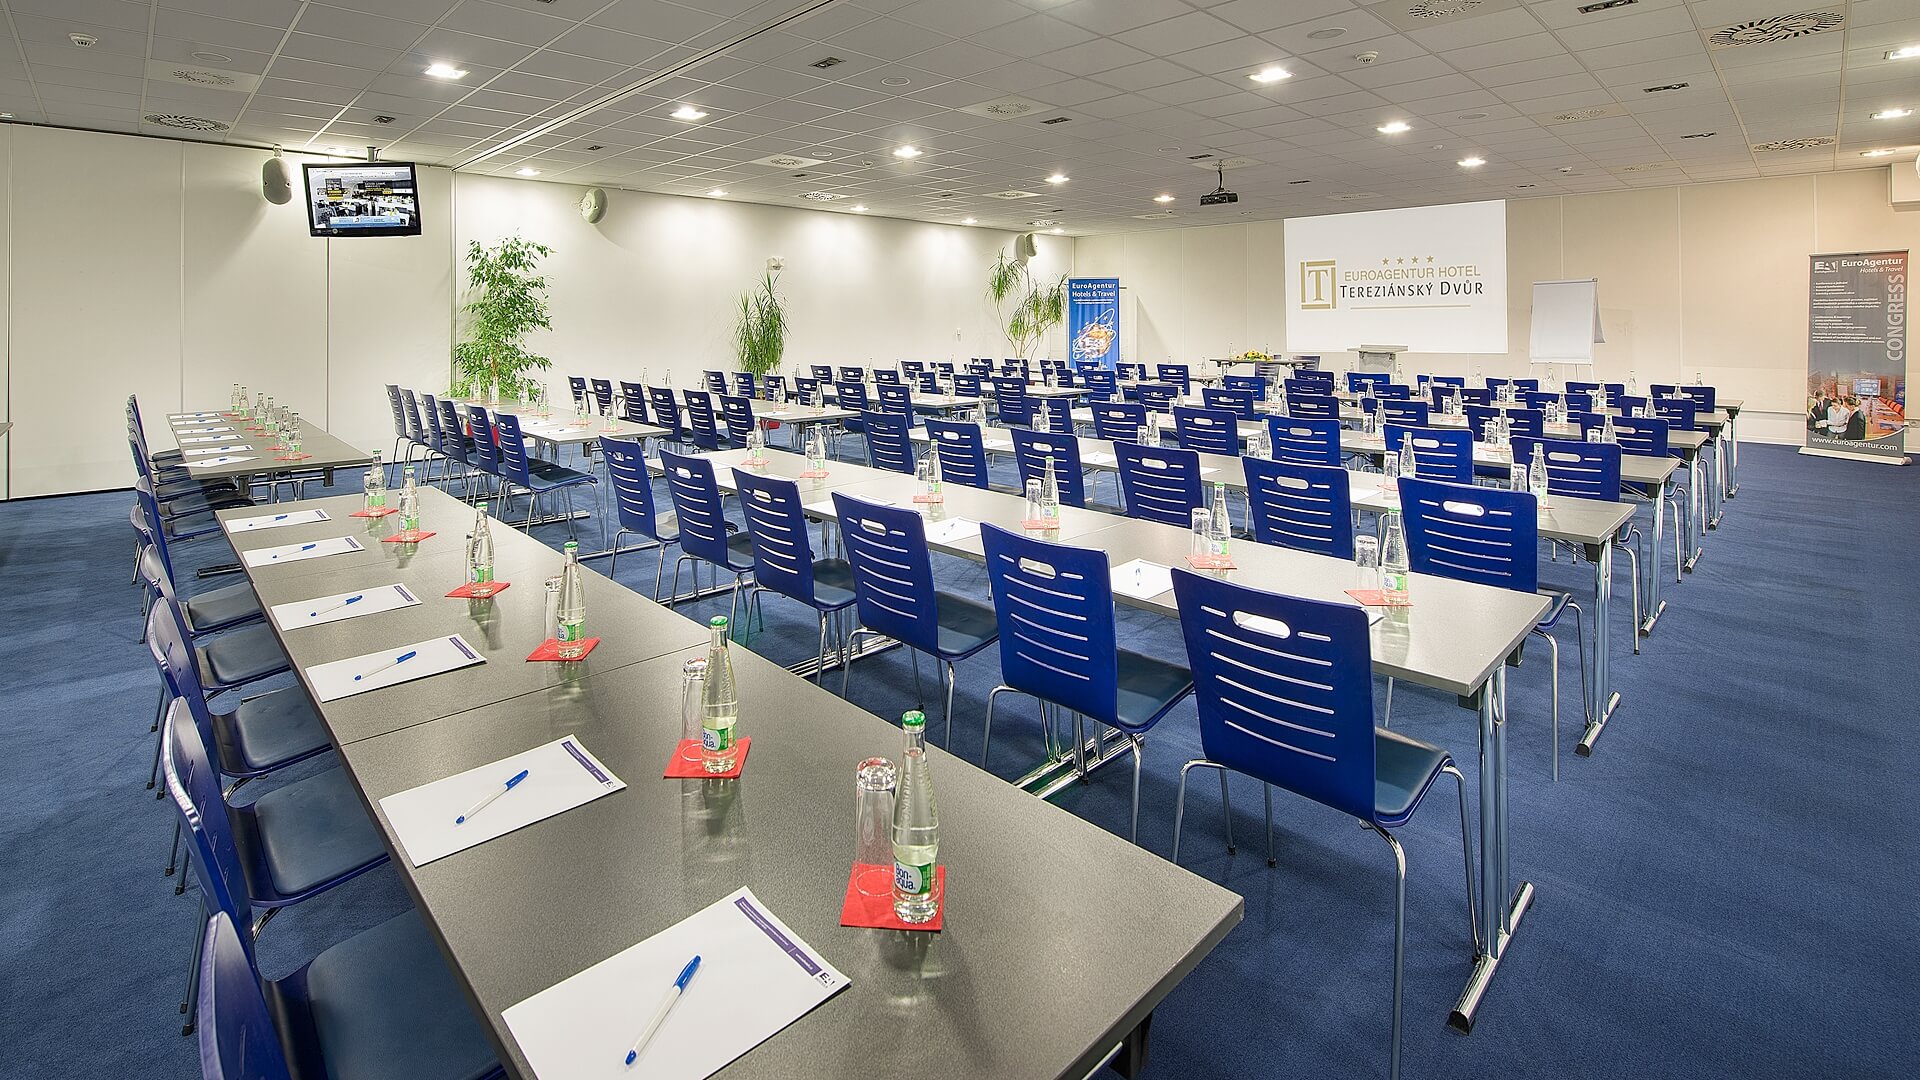 Are you looking for a top conference centre?